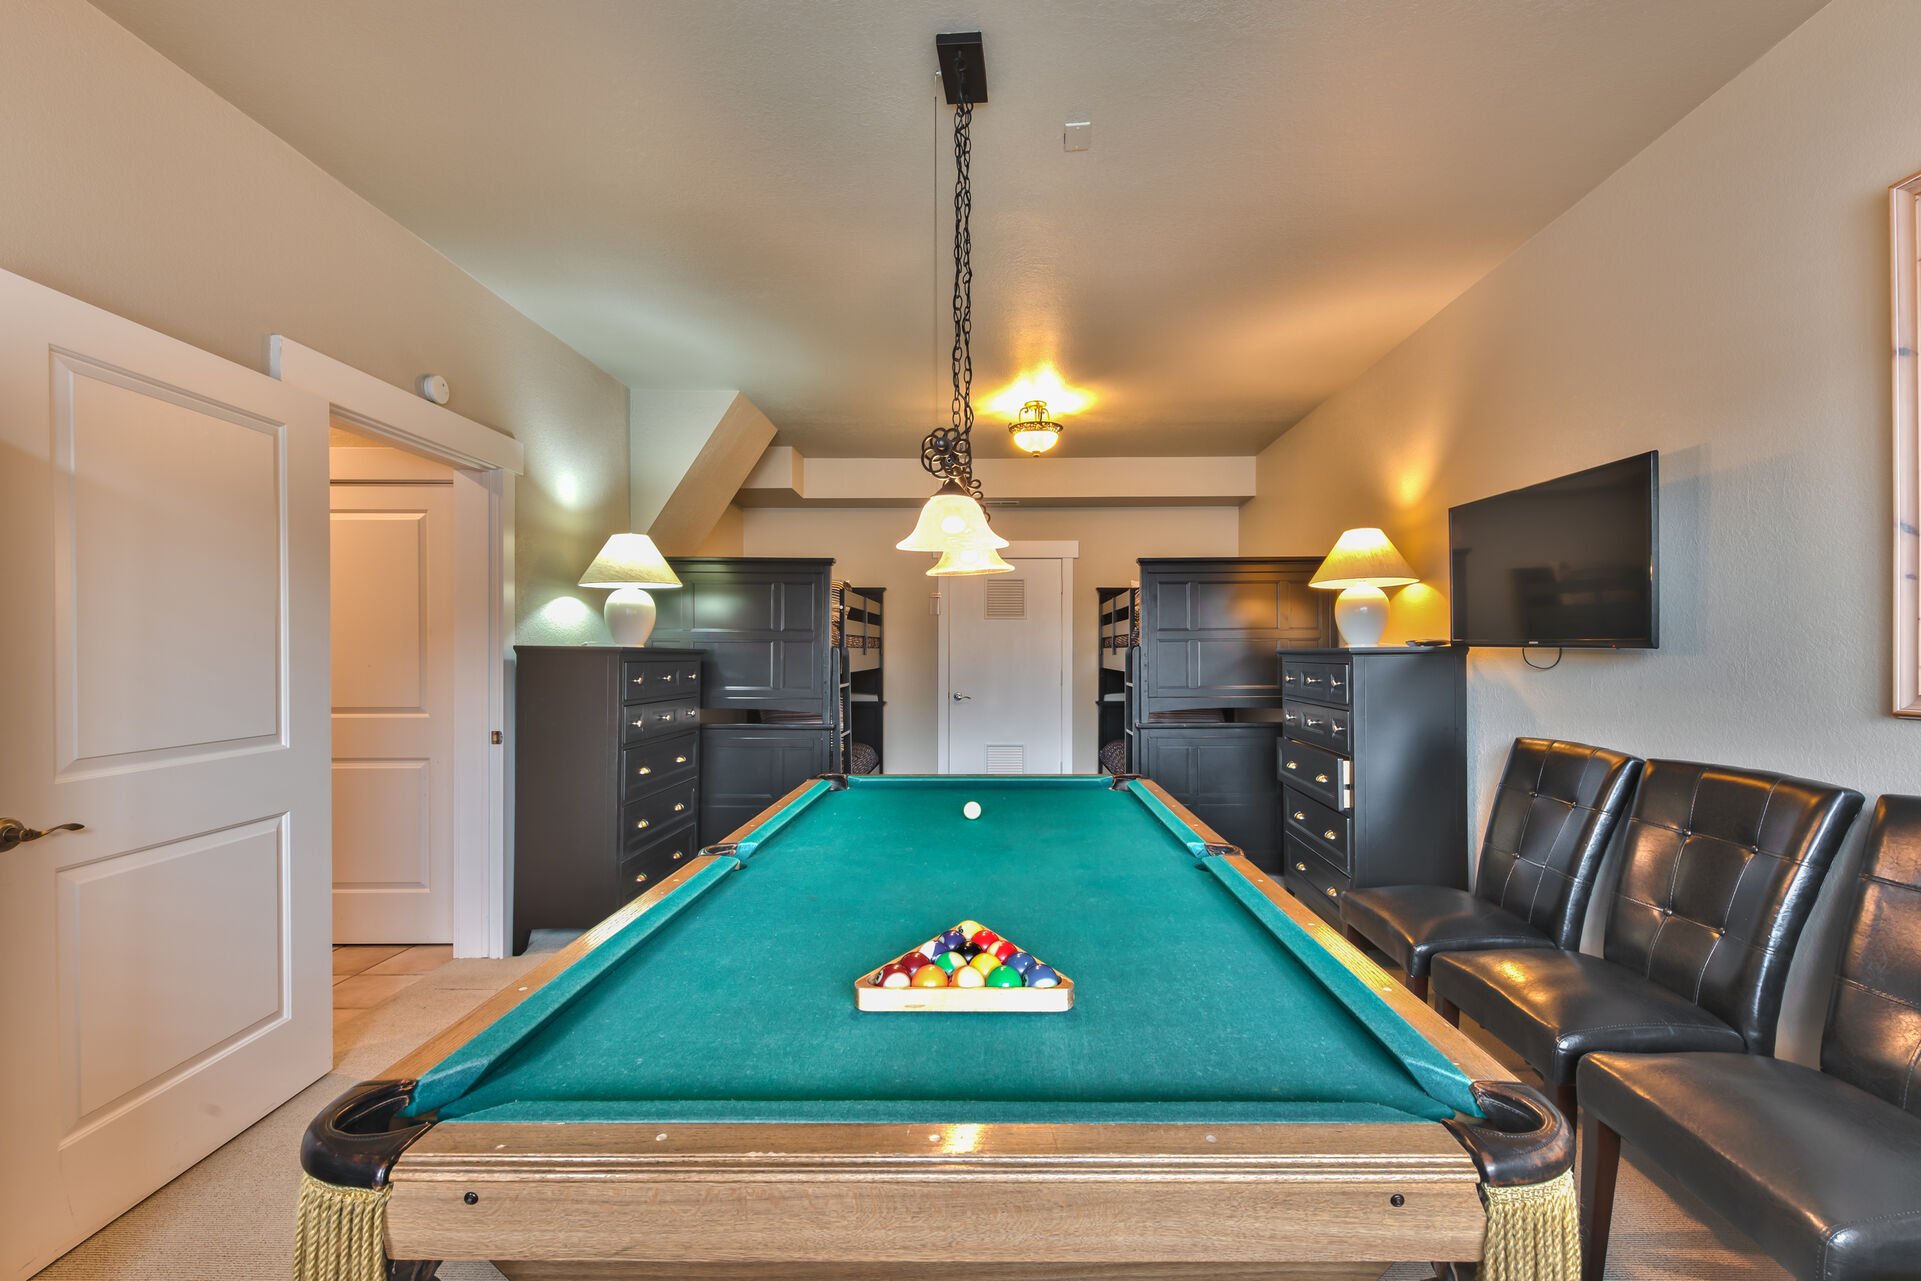 Bunk Room/Game Room with two sets of twin bunk beds and pool table